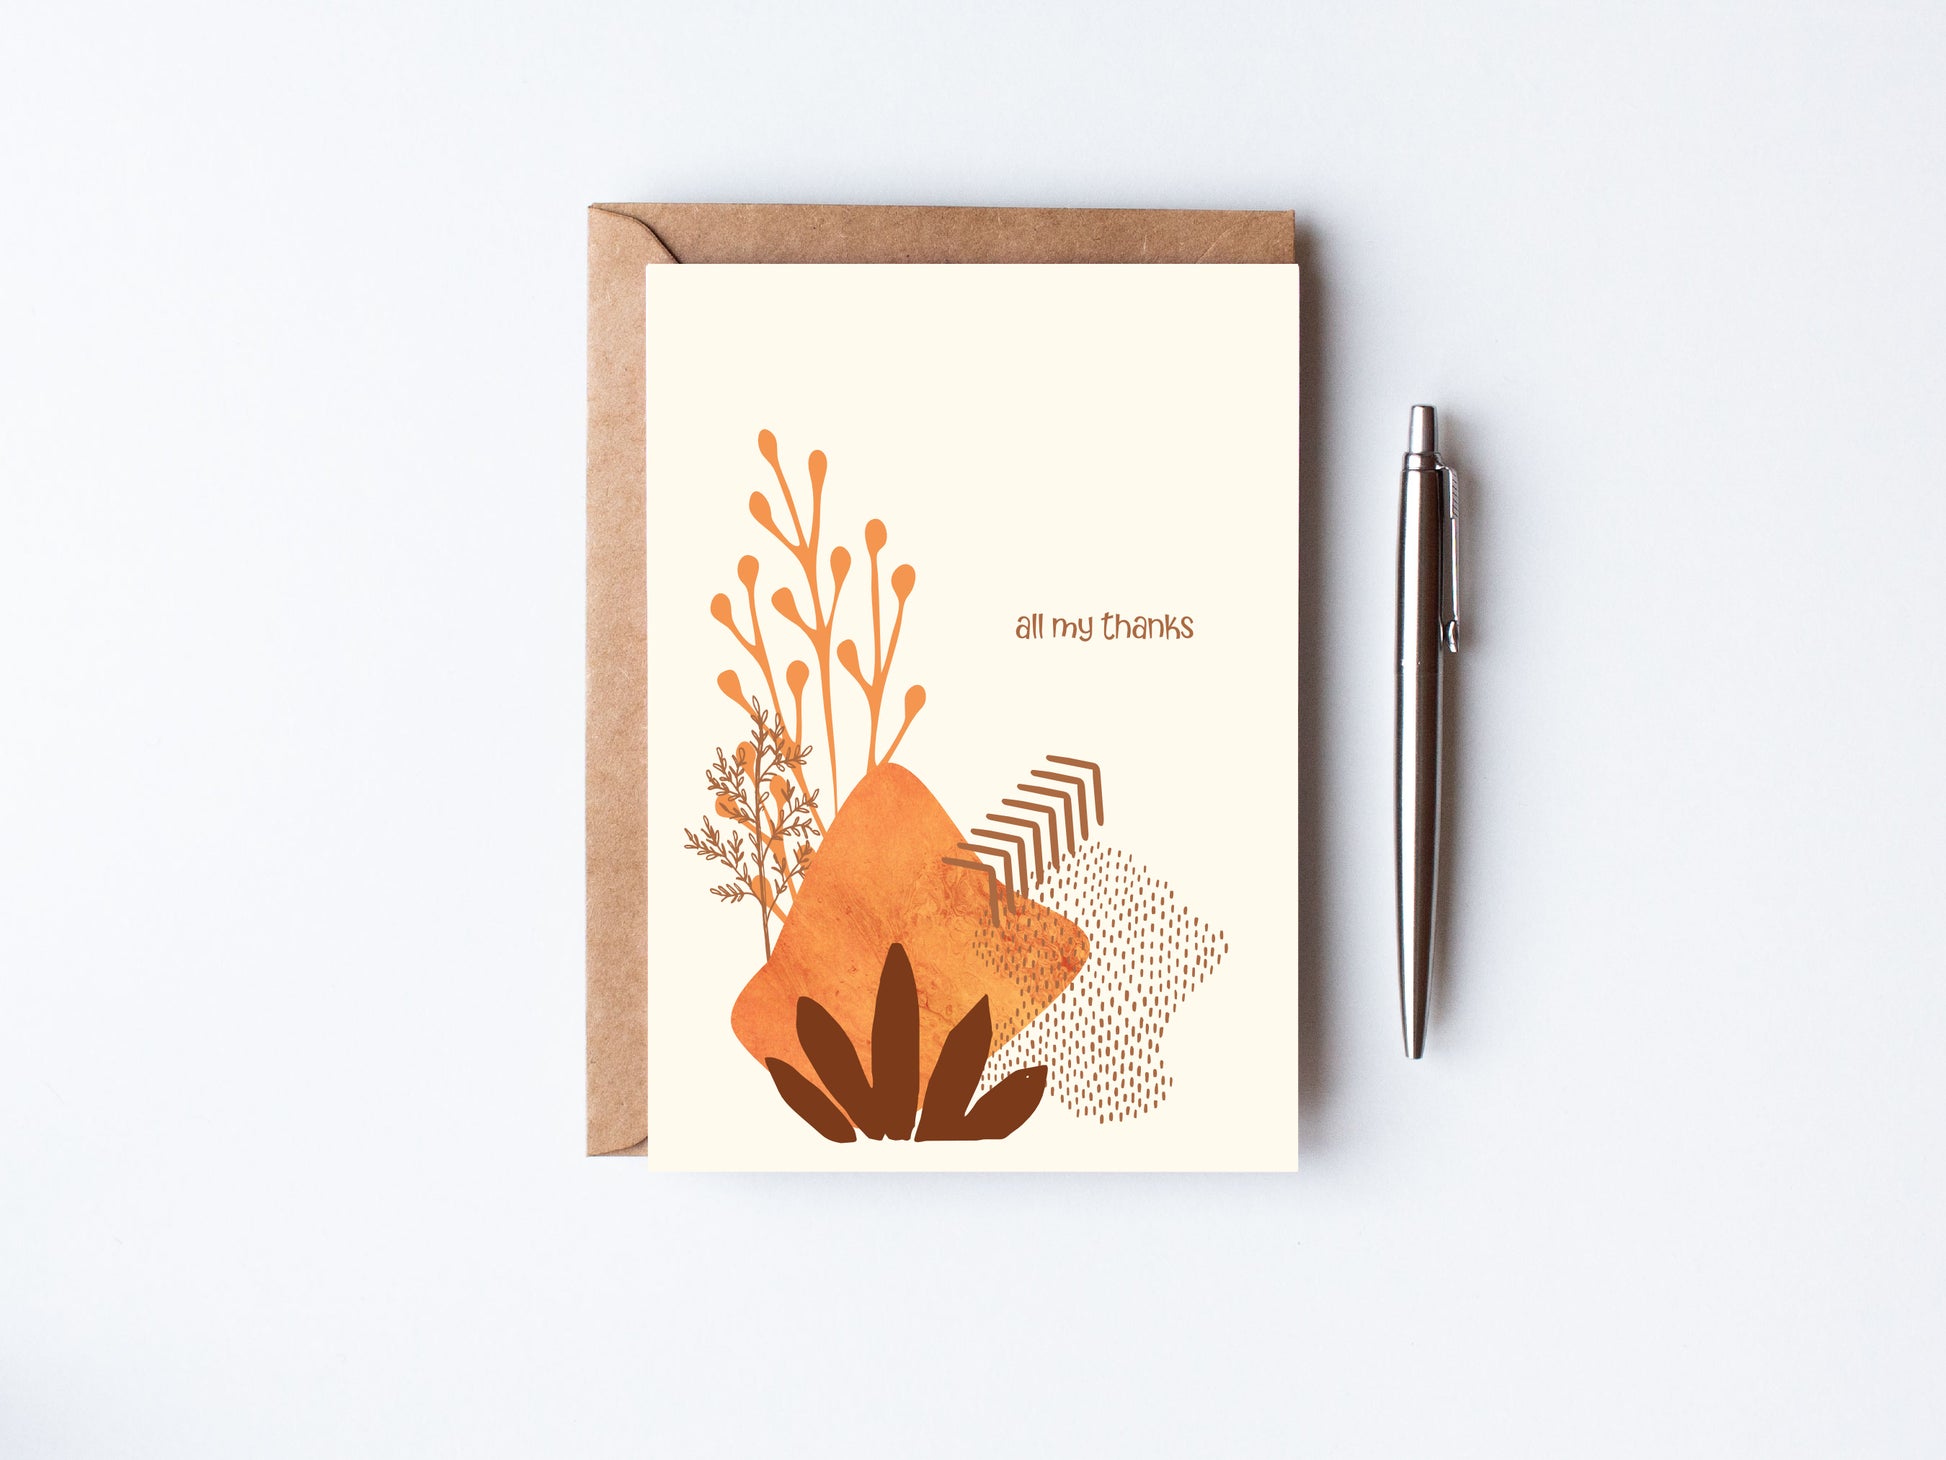 earth tones, greeting card with foliage and geometric patterns, says all my thanks